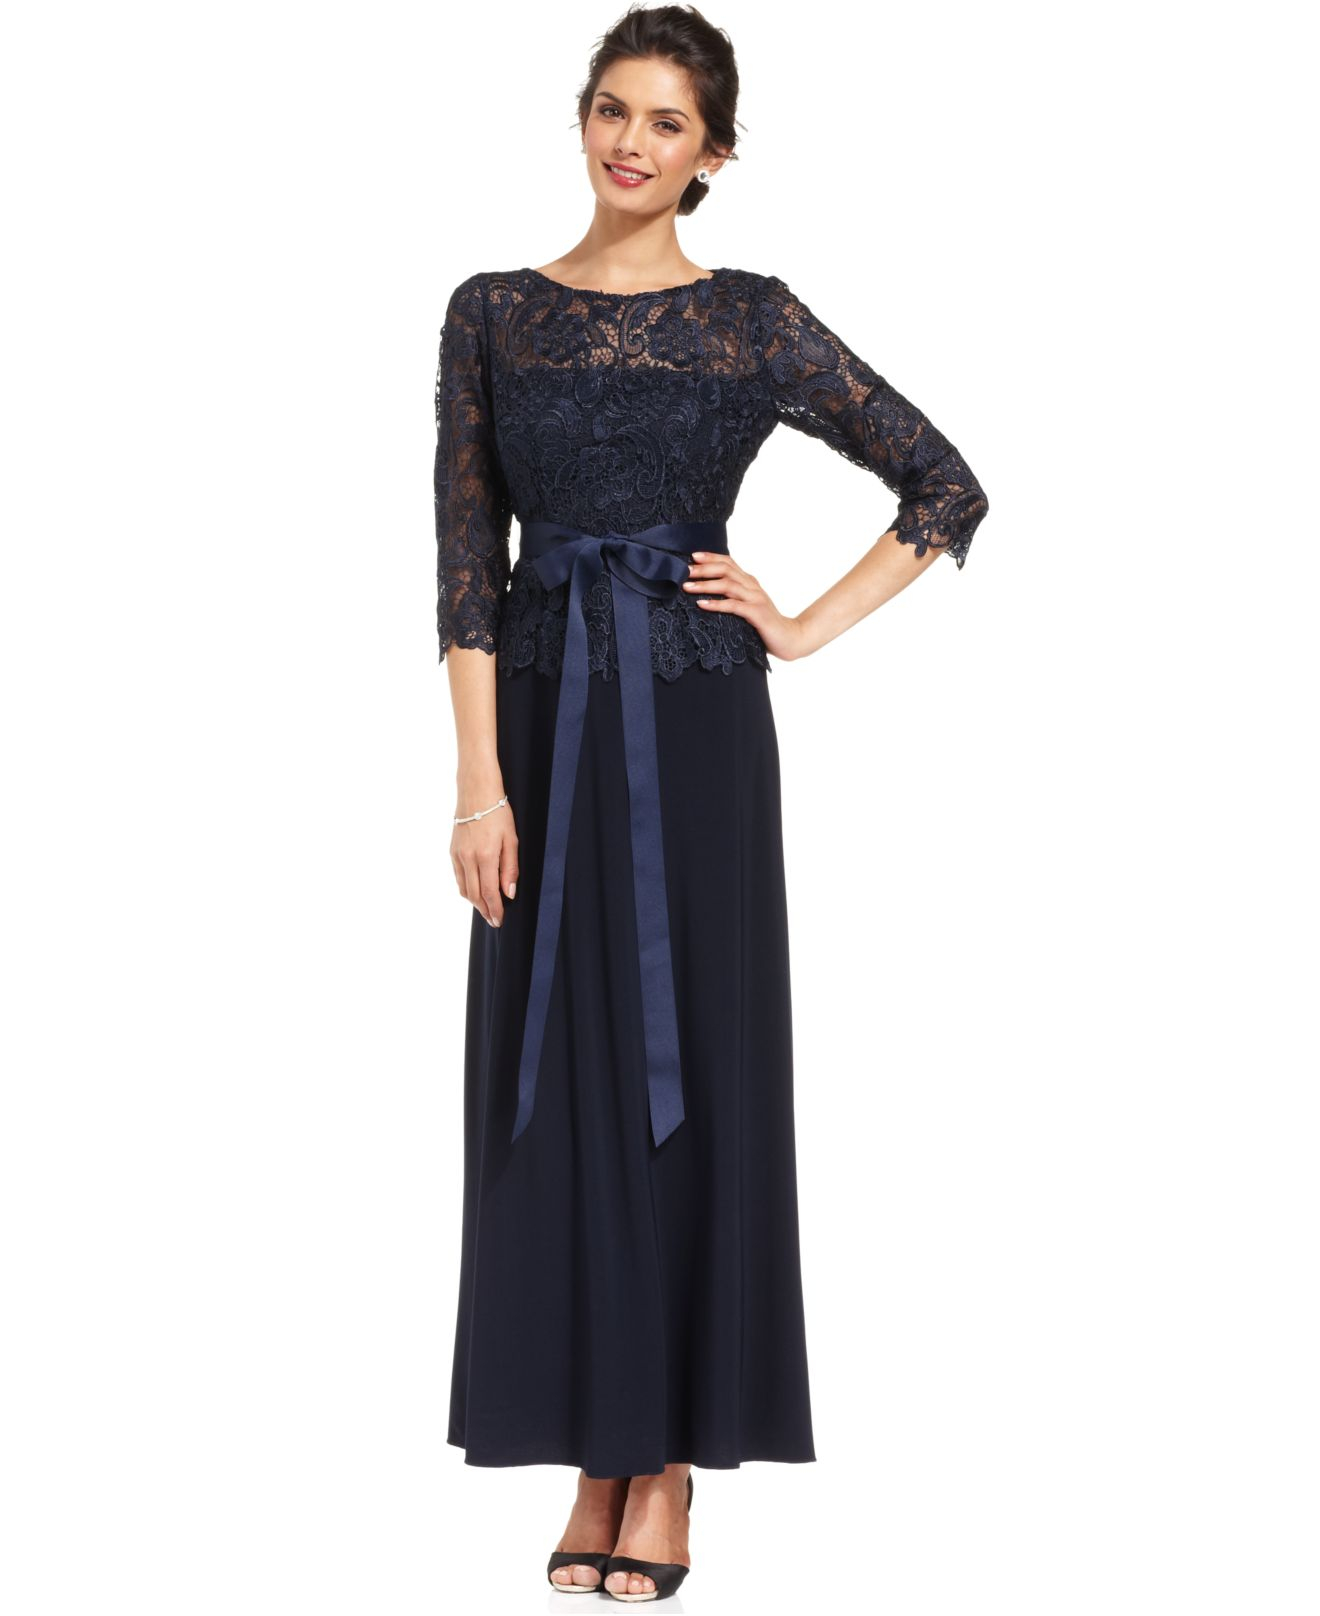 Lyst - Patra Illusion Lace Belted Gown in Blue